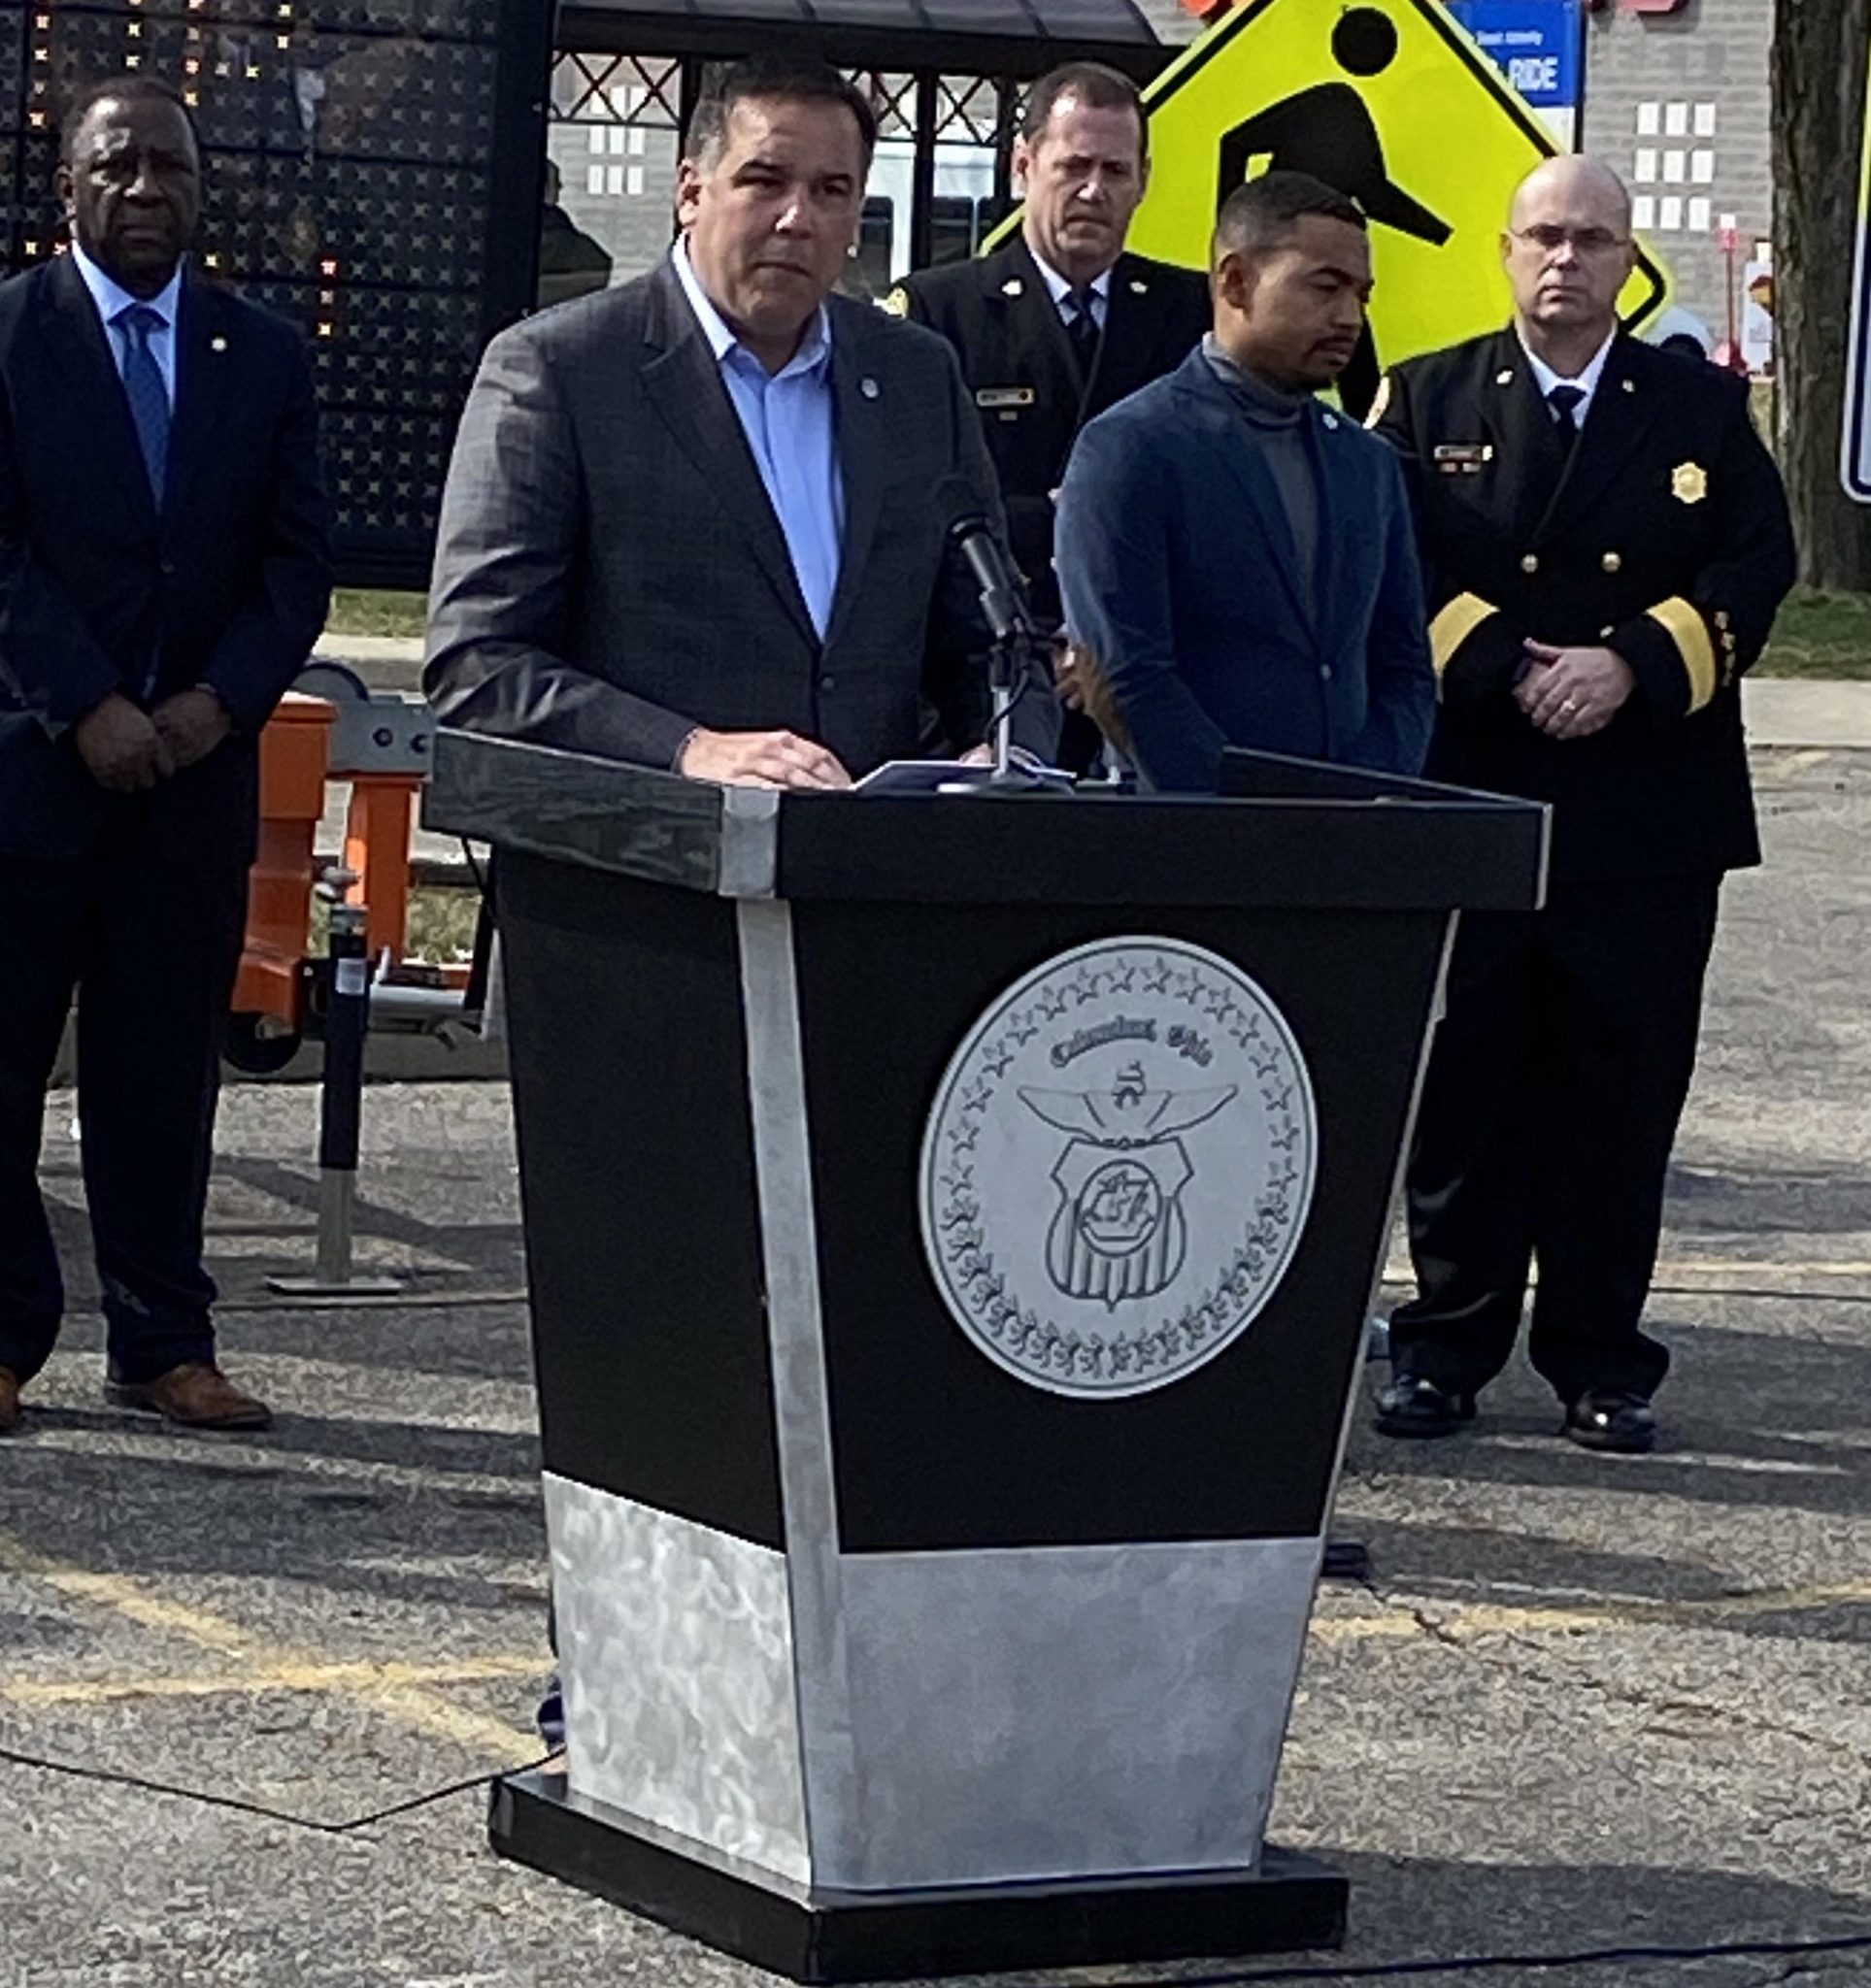 Columbus Mayor Andrew Ginther launches Vision Zero Transportation